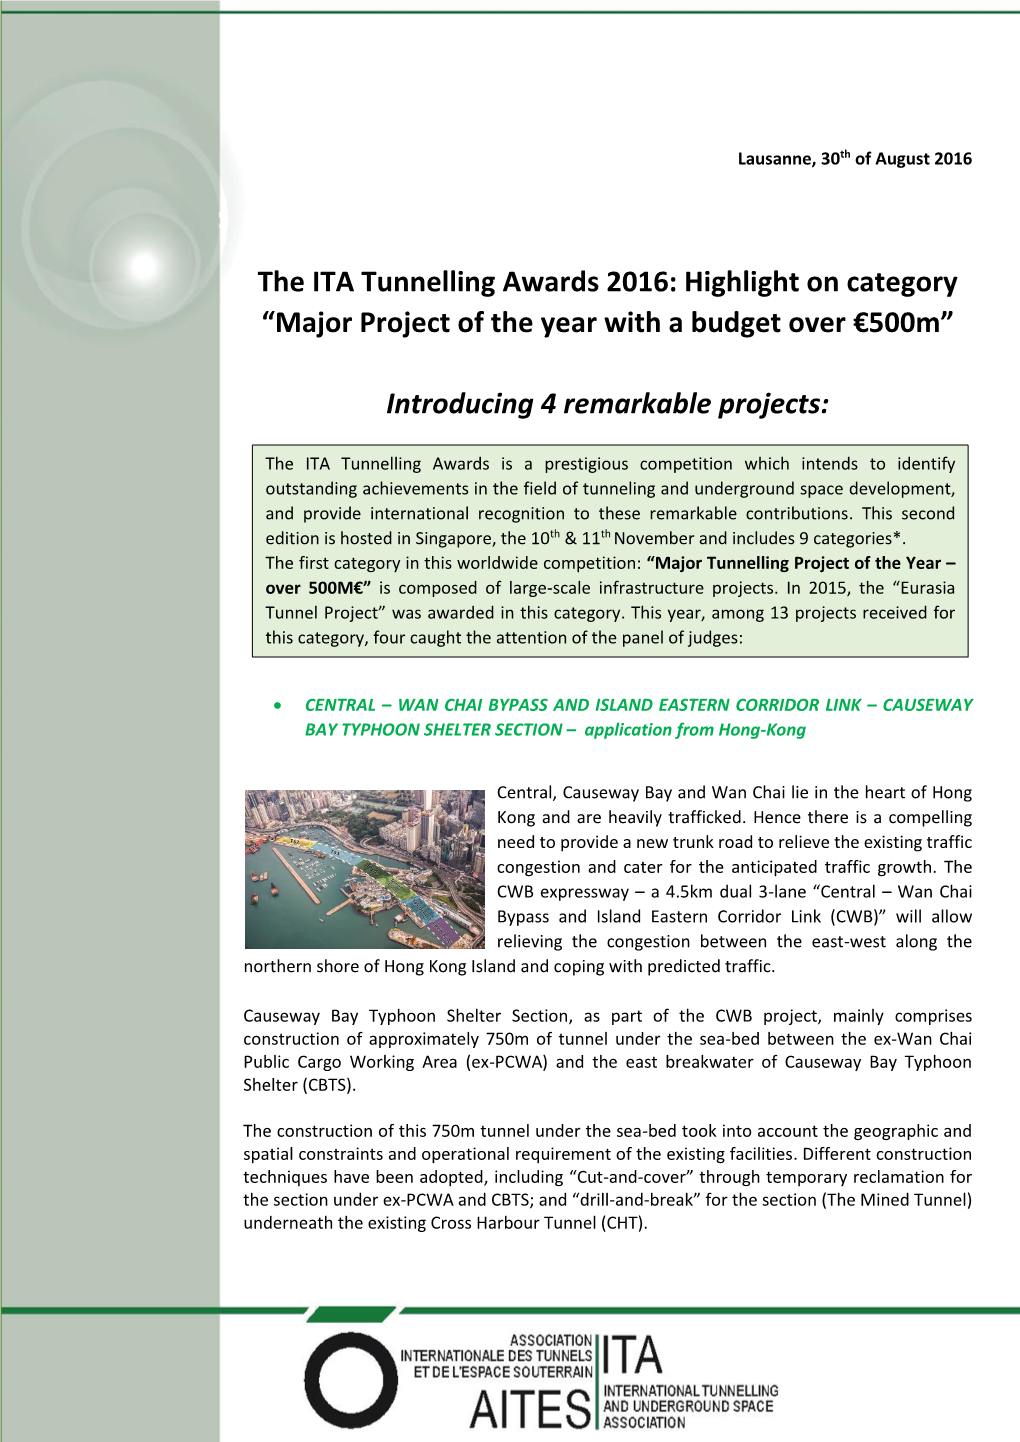 The ITA Tunnelling Awards 2016: Highlight on Category “Major Project of the Year with a Budget Over €500M”